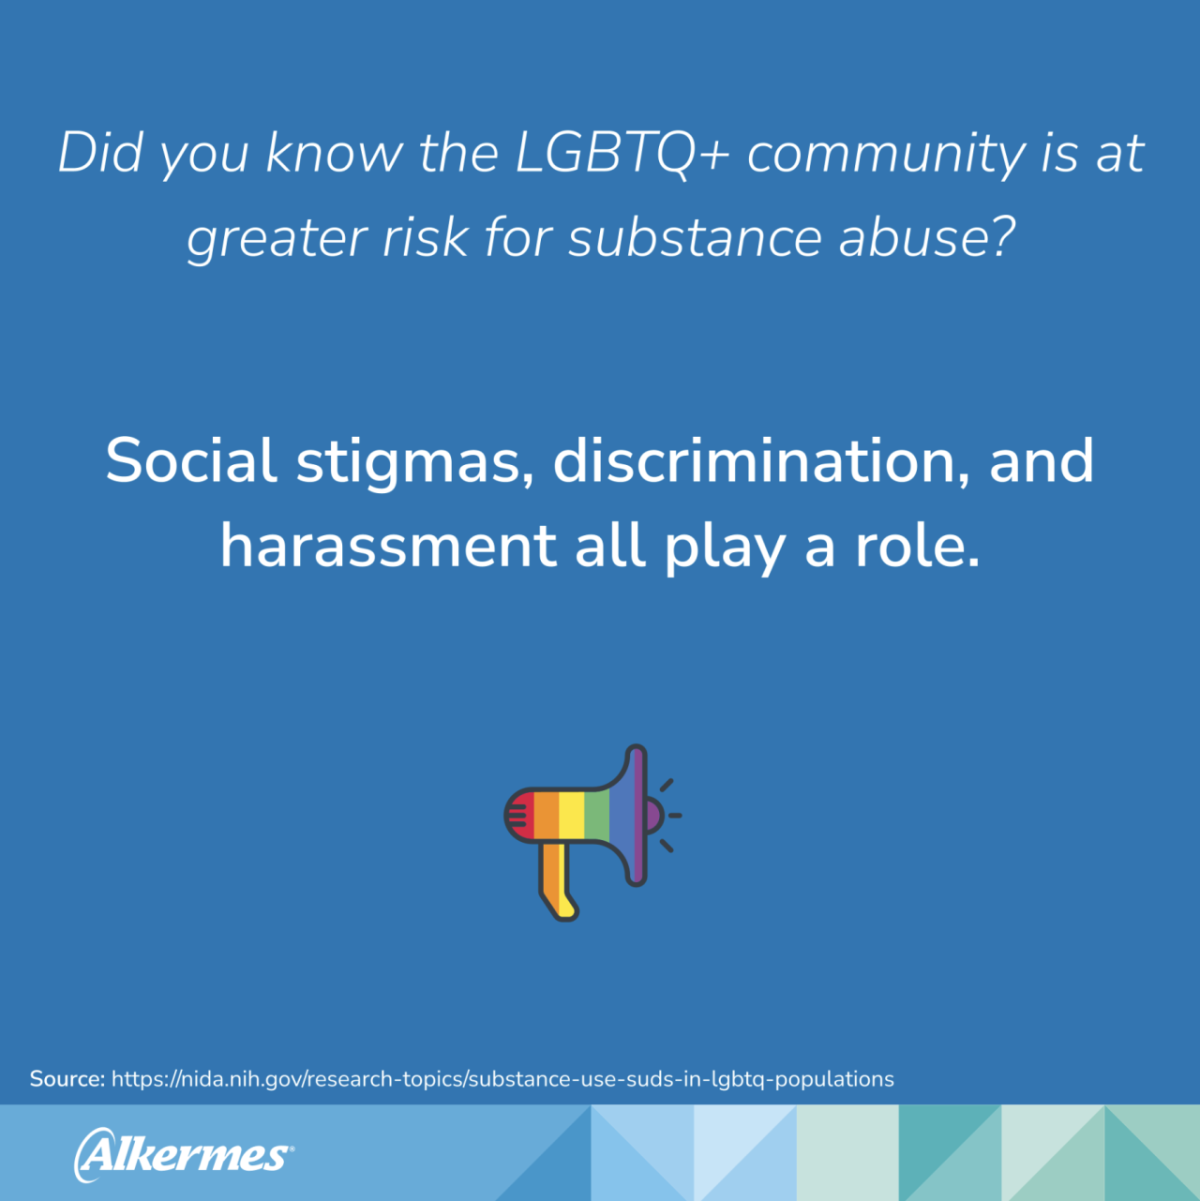 PDF slide with the text "Did you know the LGBTQ+ community is at greater risk for substance abuse? Source: https://nida.nih.gov/research-topics/substance-use-suds-in-lgbtq-populations Social stigmas, discrimination, and harassment all play a role." Source: https://nida.nih.gov/research-topics/substance-use-suds-in-lgbtq-populations